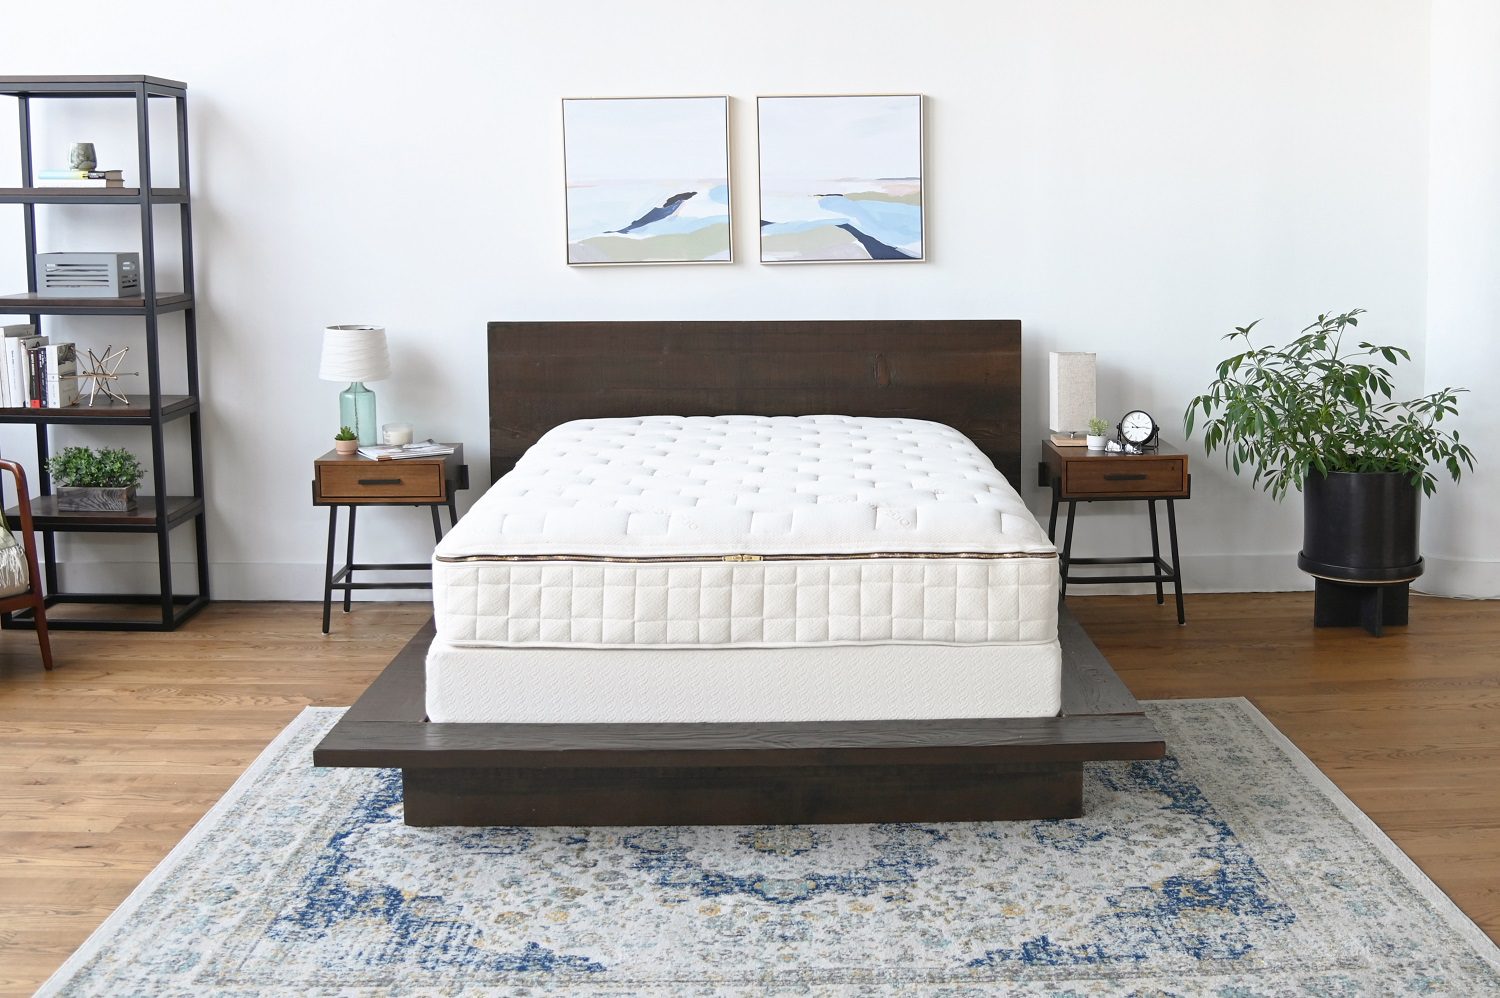 product page image of the naturepedic eos mattress